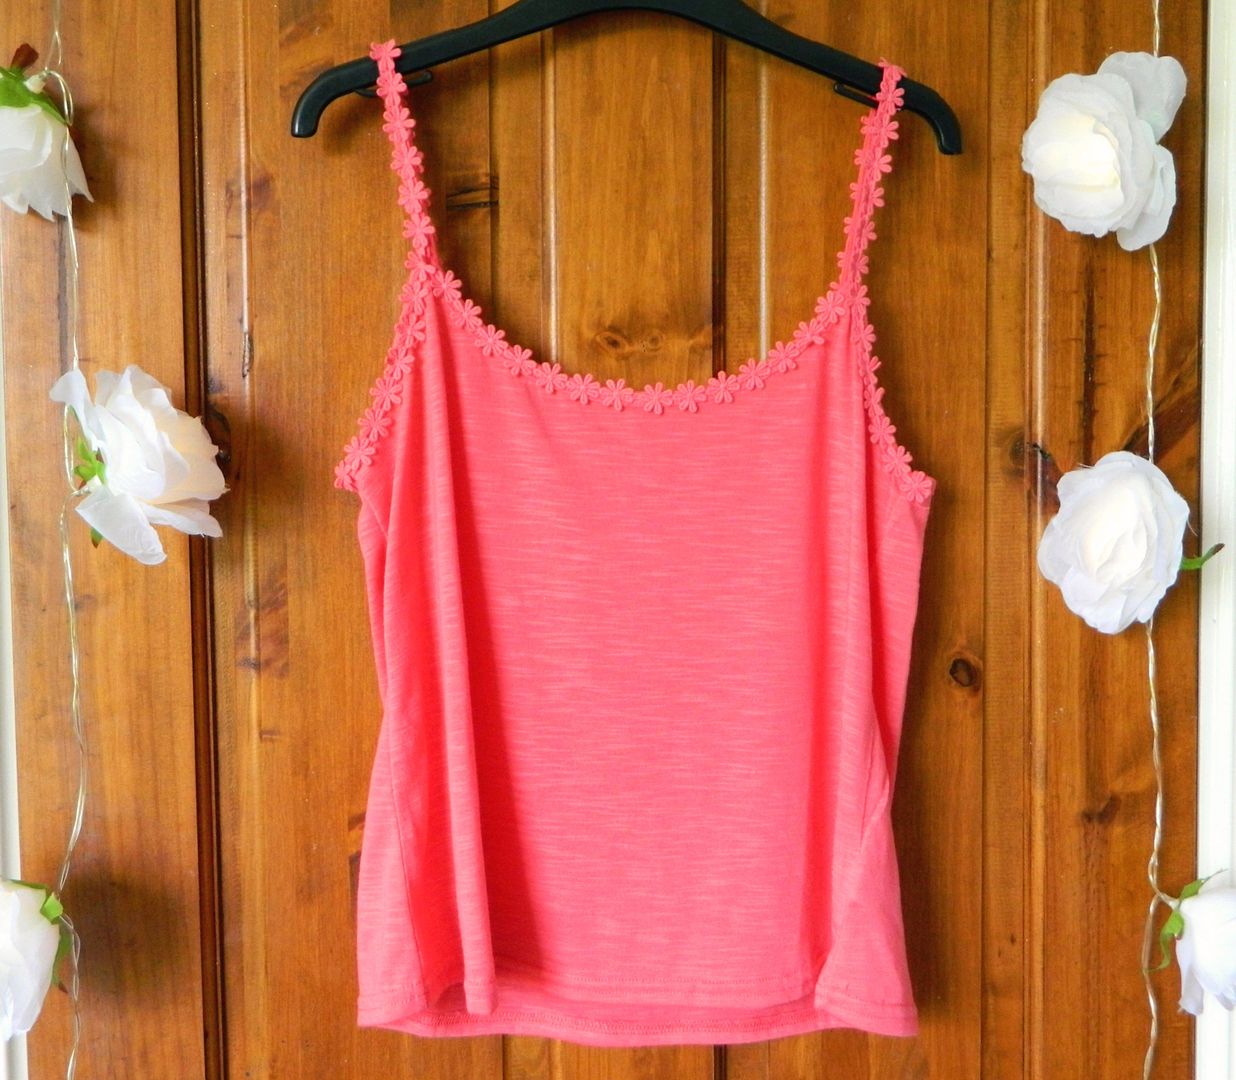 Spring Summer Fashion Accessories Haul 2014 New Look Daisy Detail Pink Coral Cami Belle-amie UK Beauty Fashion Lifestyle Blog